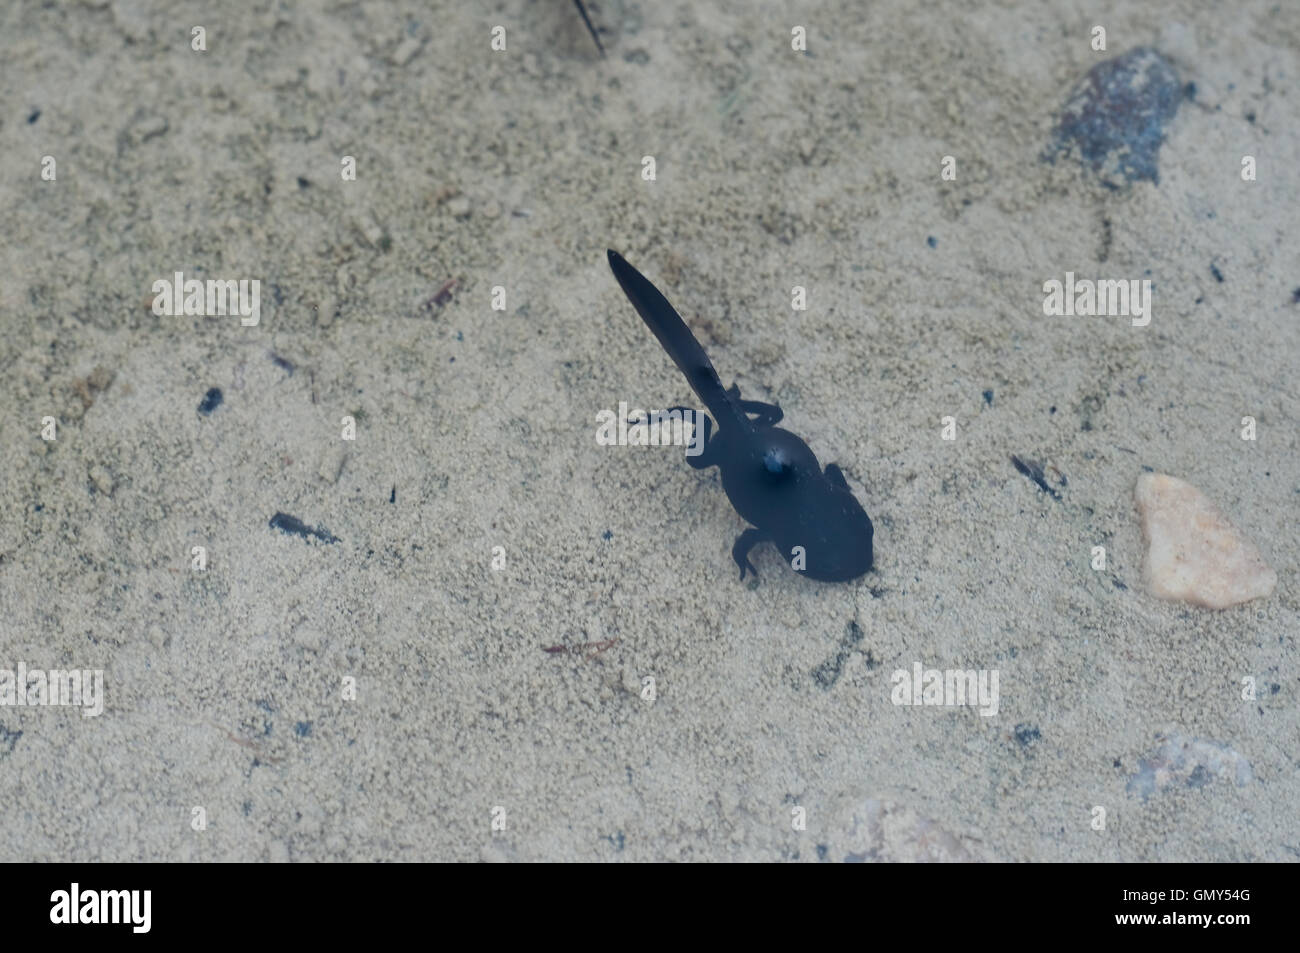 Tadpole with legs swimming in a small pond Stock Photo